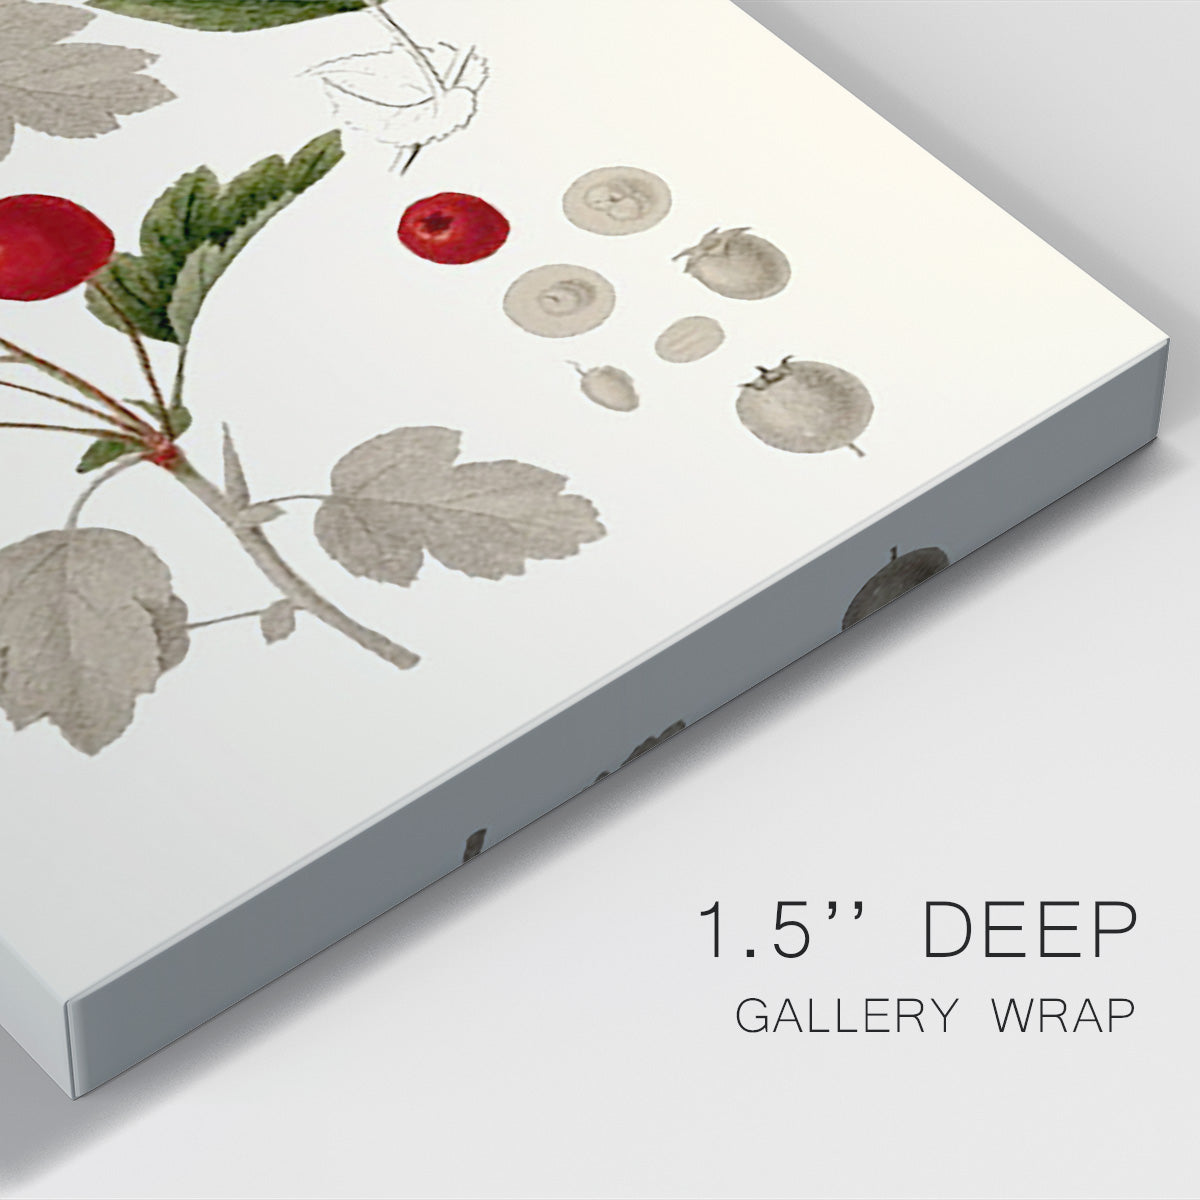 Leaves & Berries III Premium Gallery Wrapped Canvas - Ready to Hang